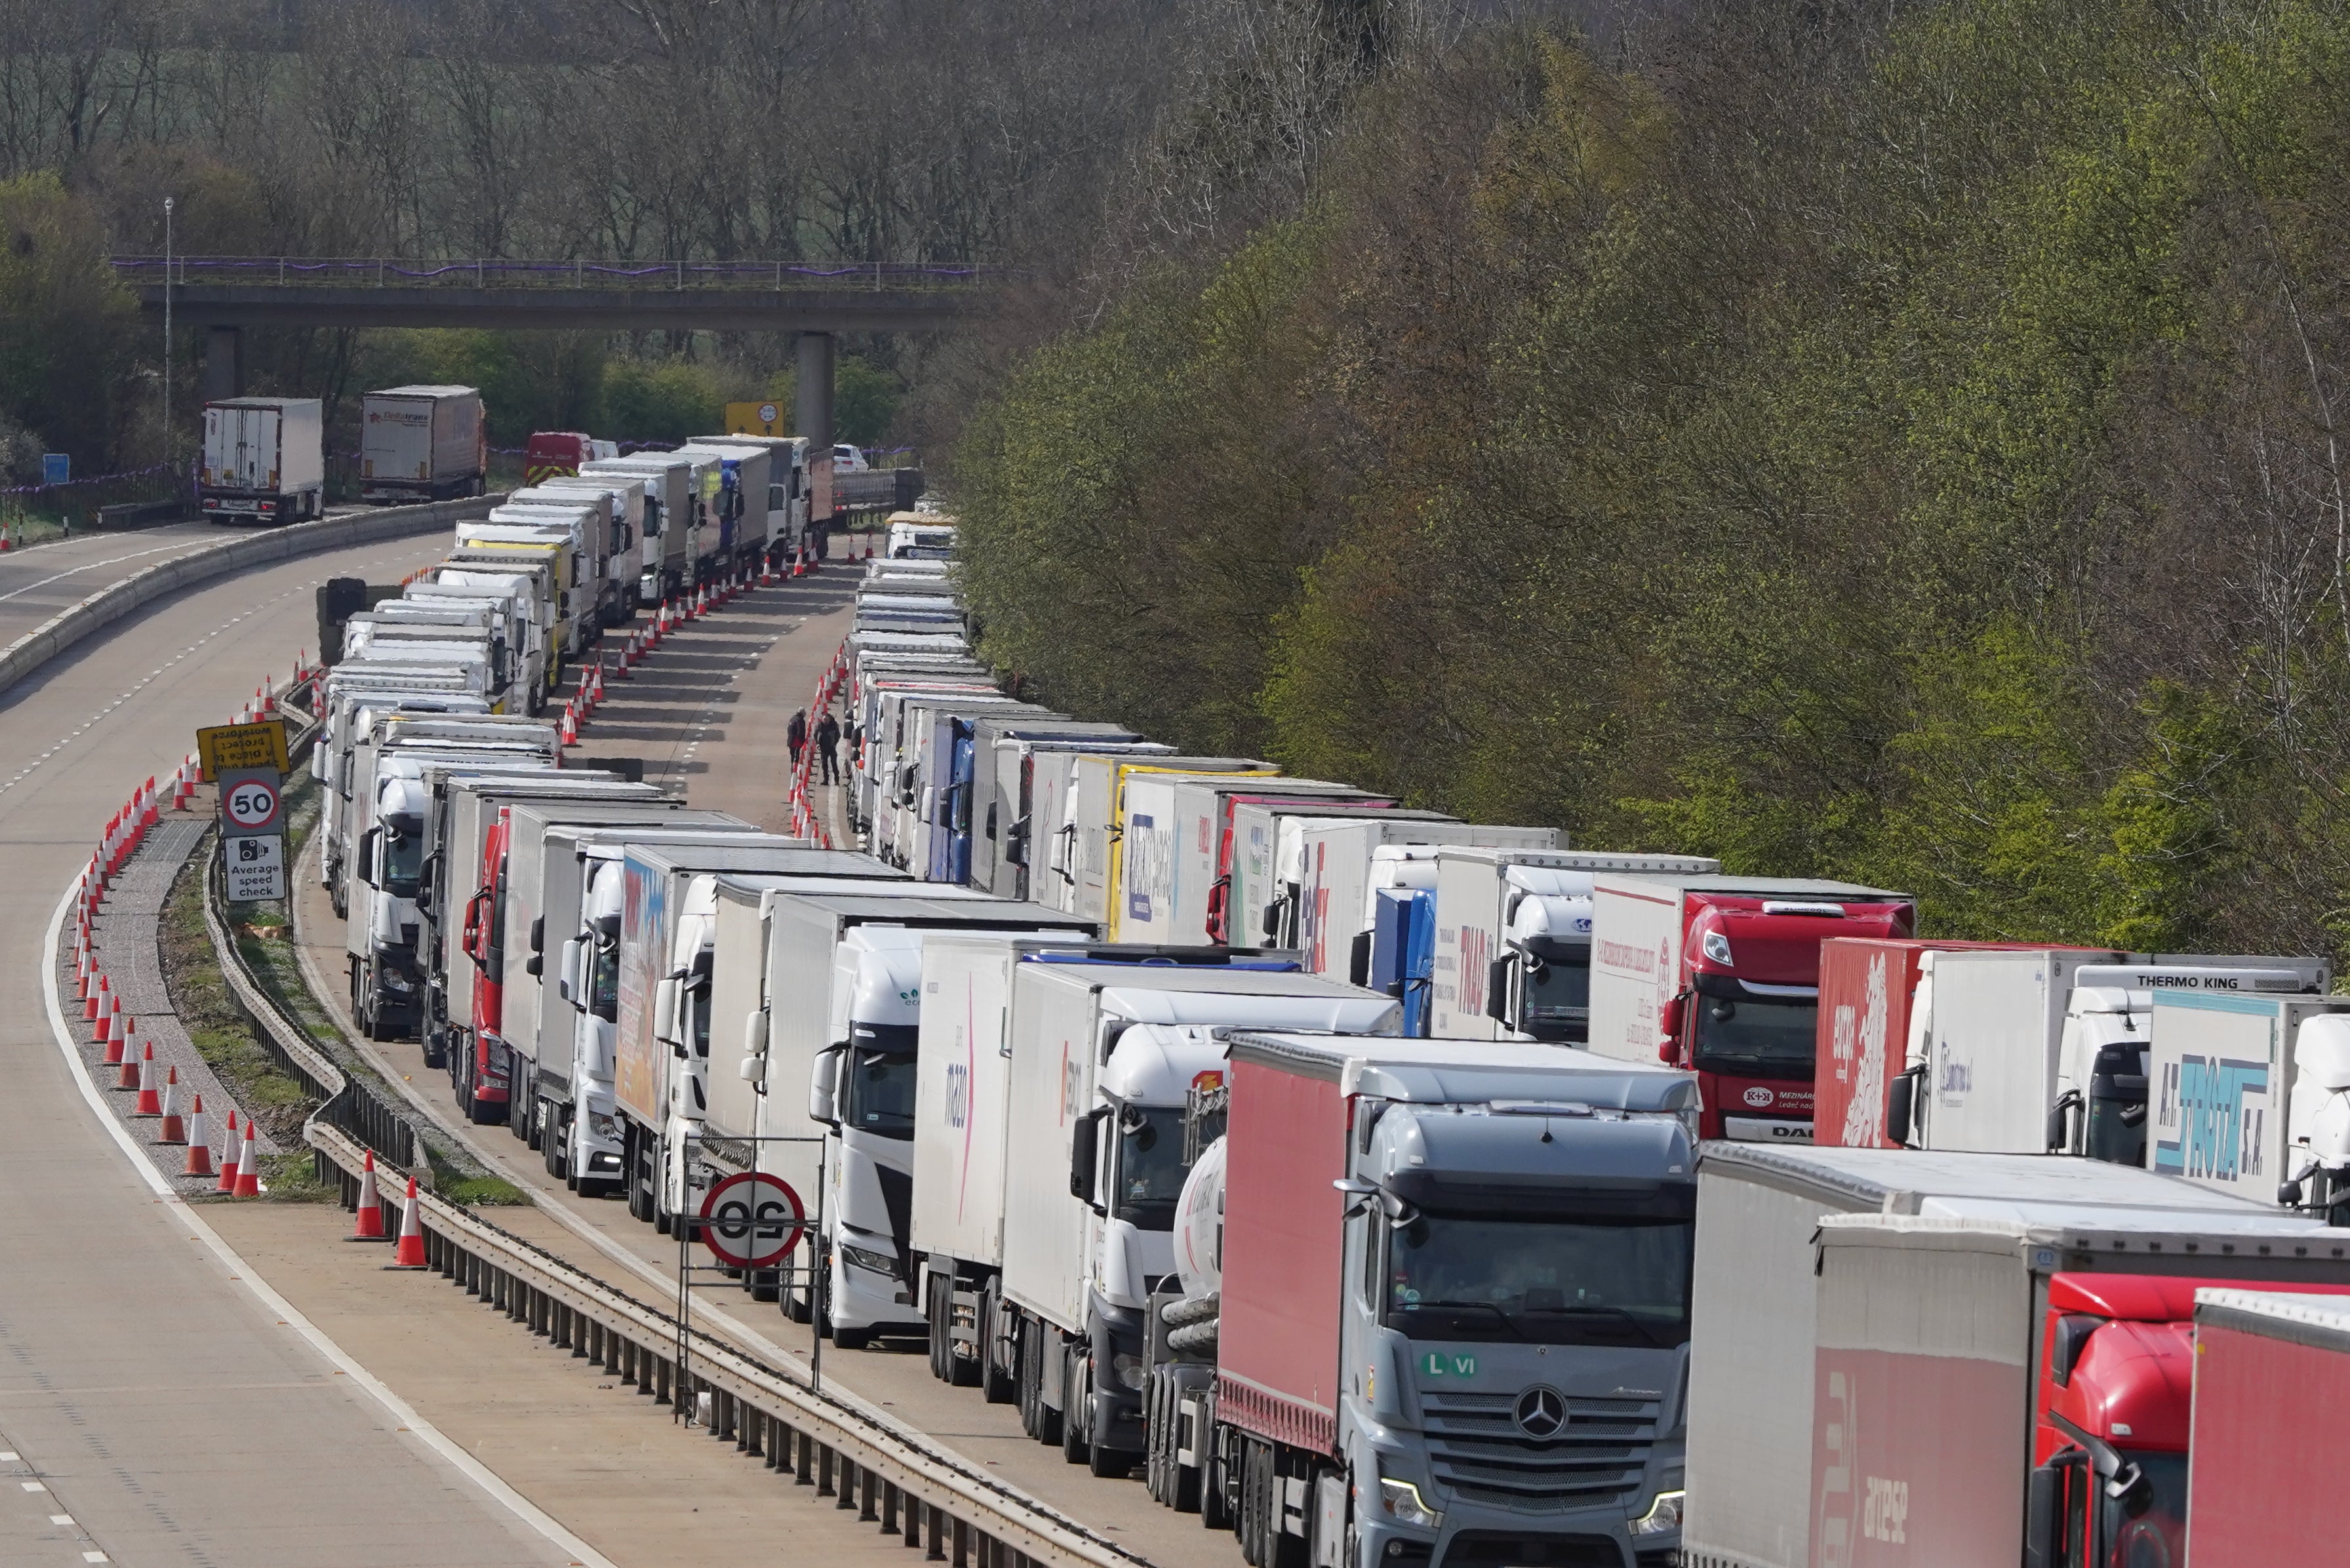 Operation Brock is activated as lorries queue on the M20 in Ashford, Kent, as some ferry services remain suspended at the Port of Dover following P&O Ferries sacking of 800 seafarers without notice on March 17, amid plans to bring in cheaper agency staff. Picture date: Friday April 1, 2022.